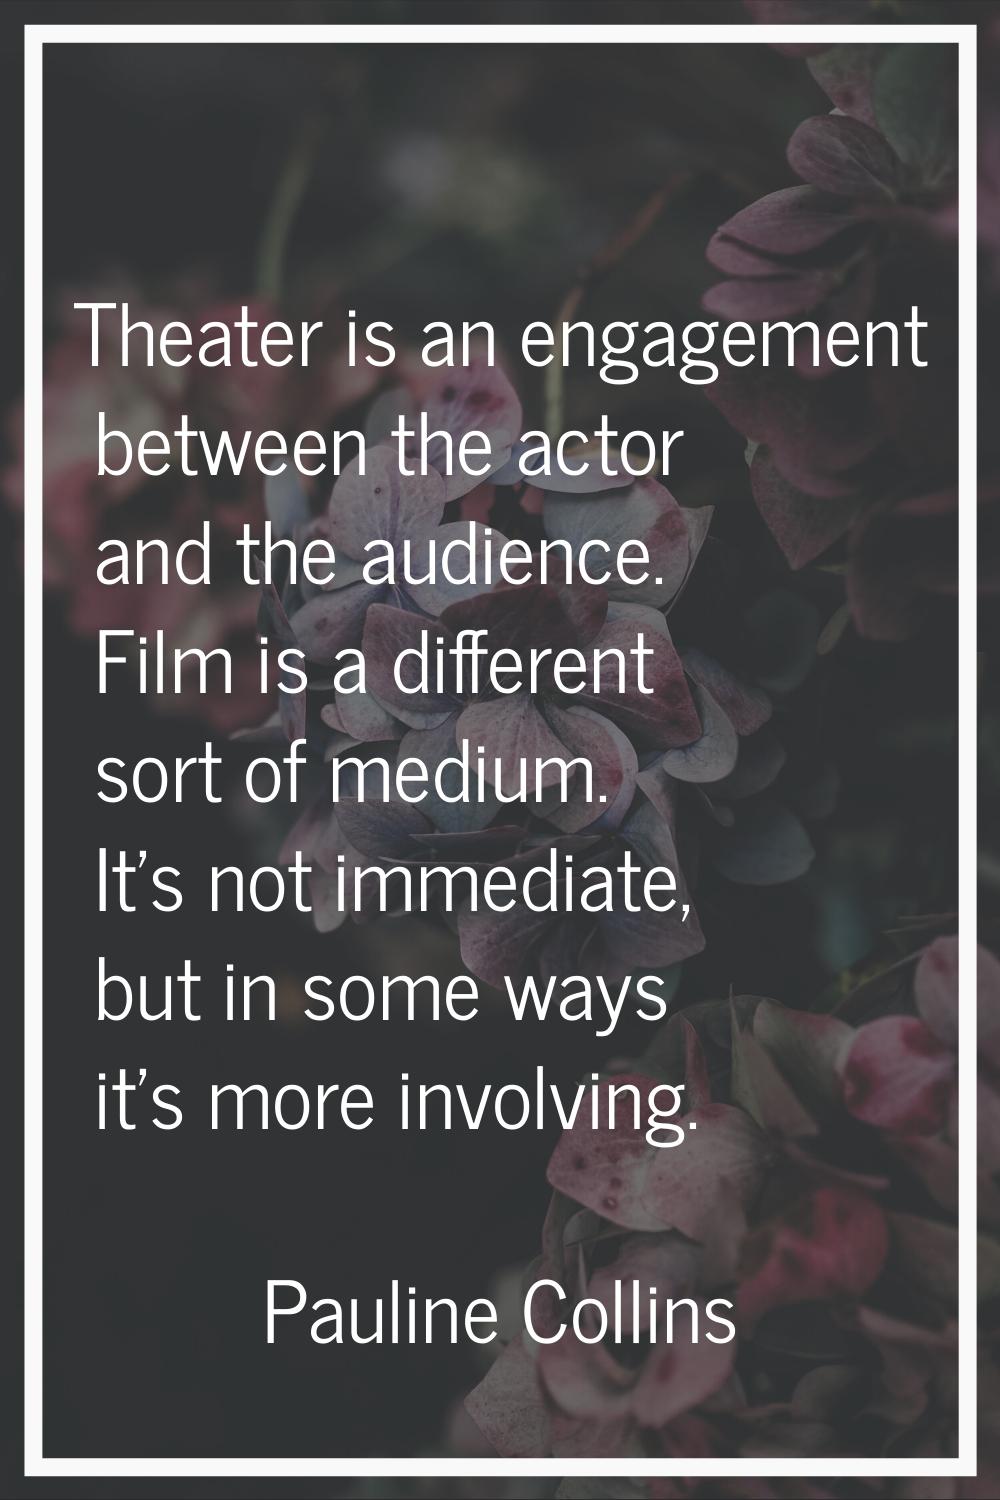 Theater is an engagement between the actor and the audience. Film is a different sort of medium. It